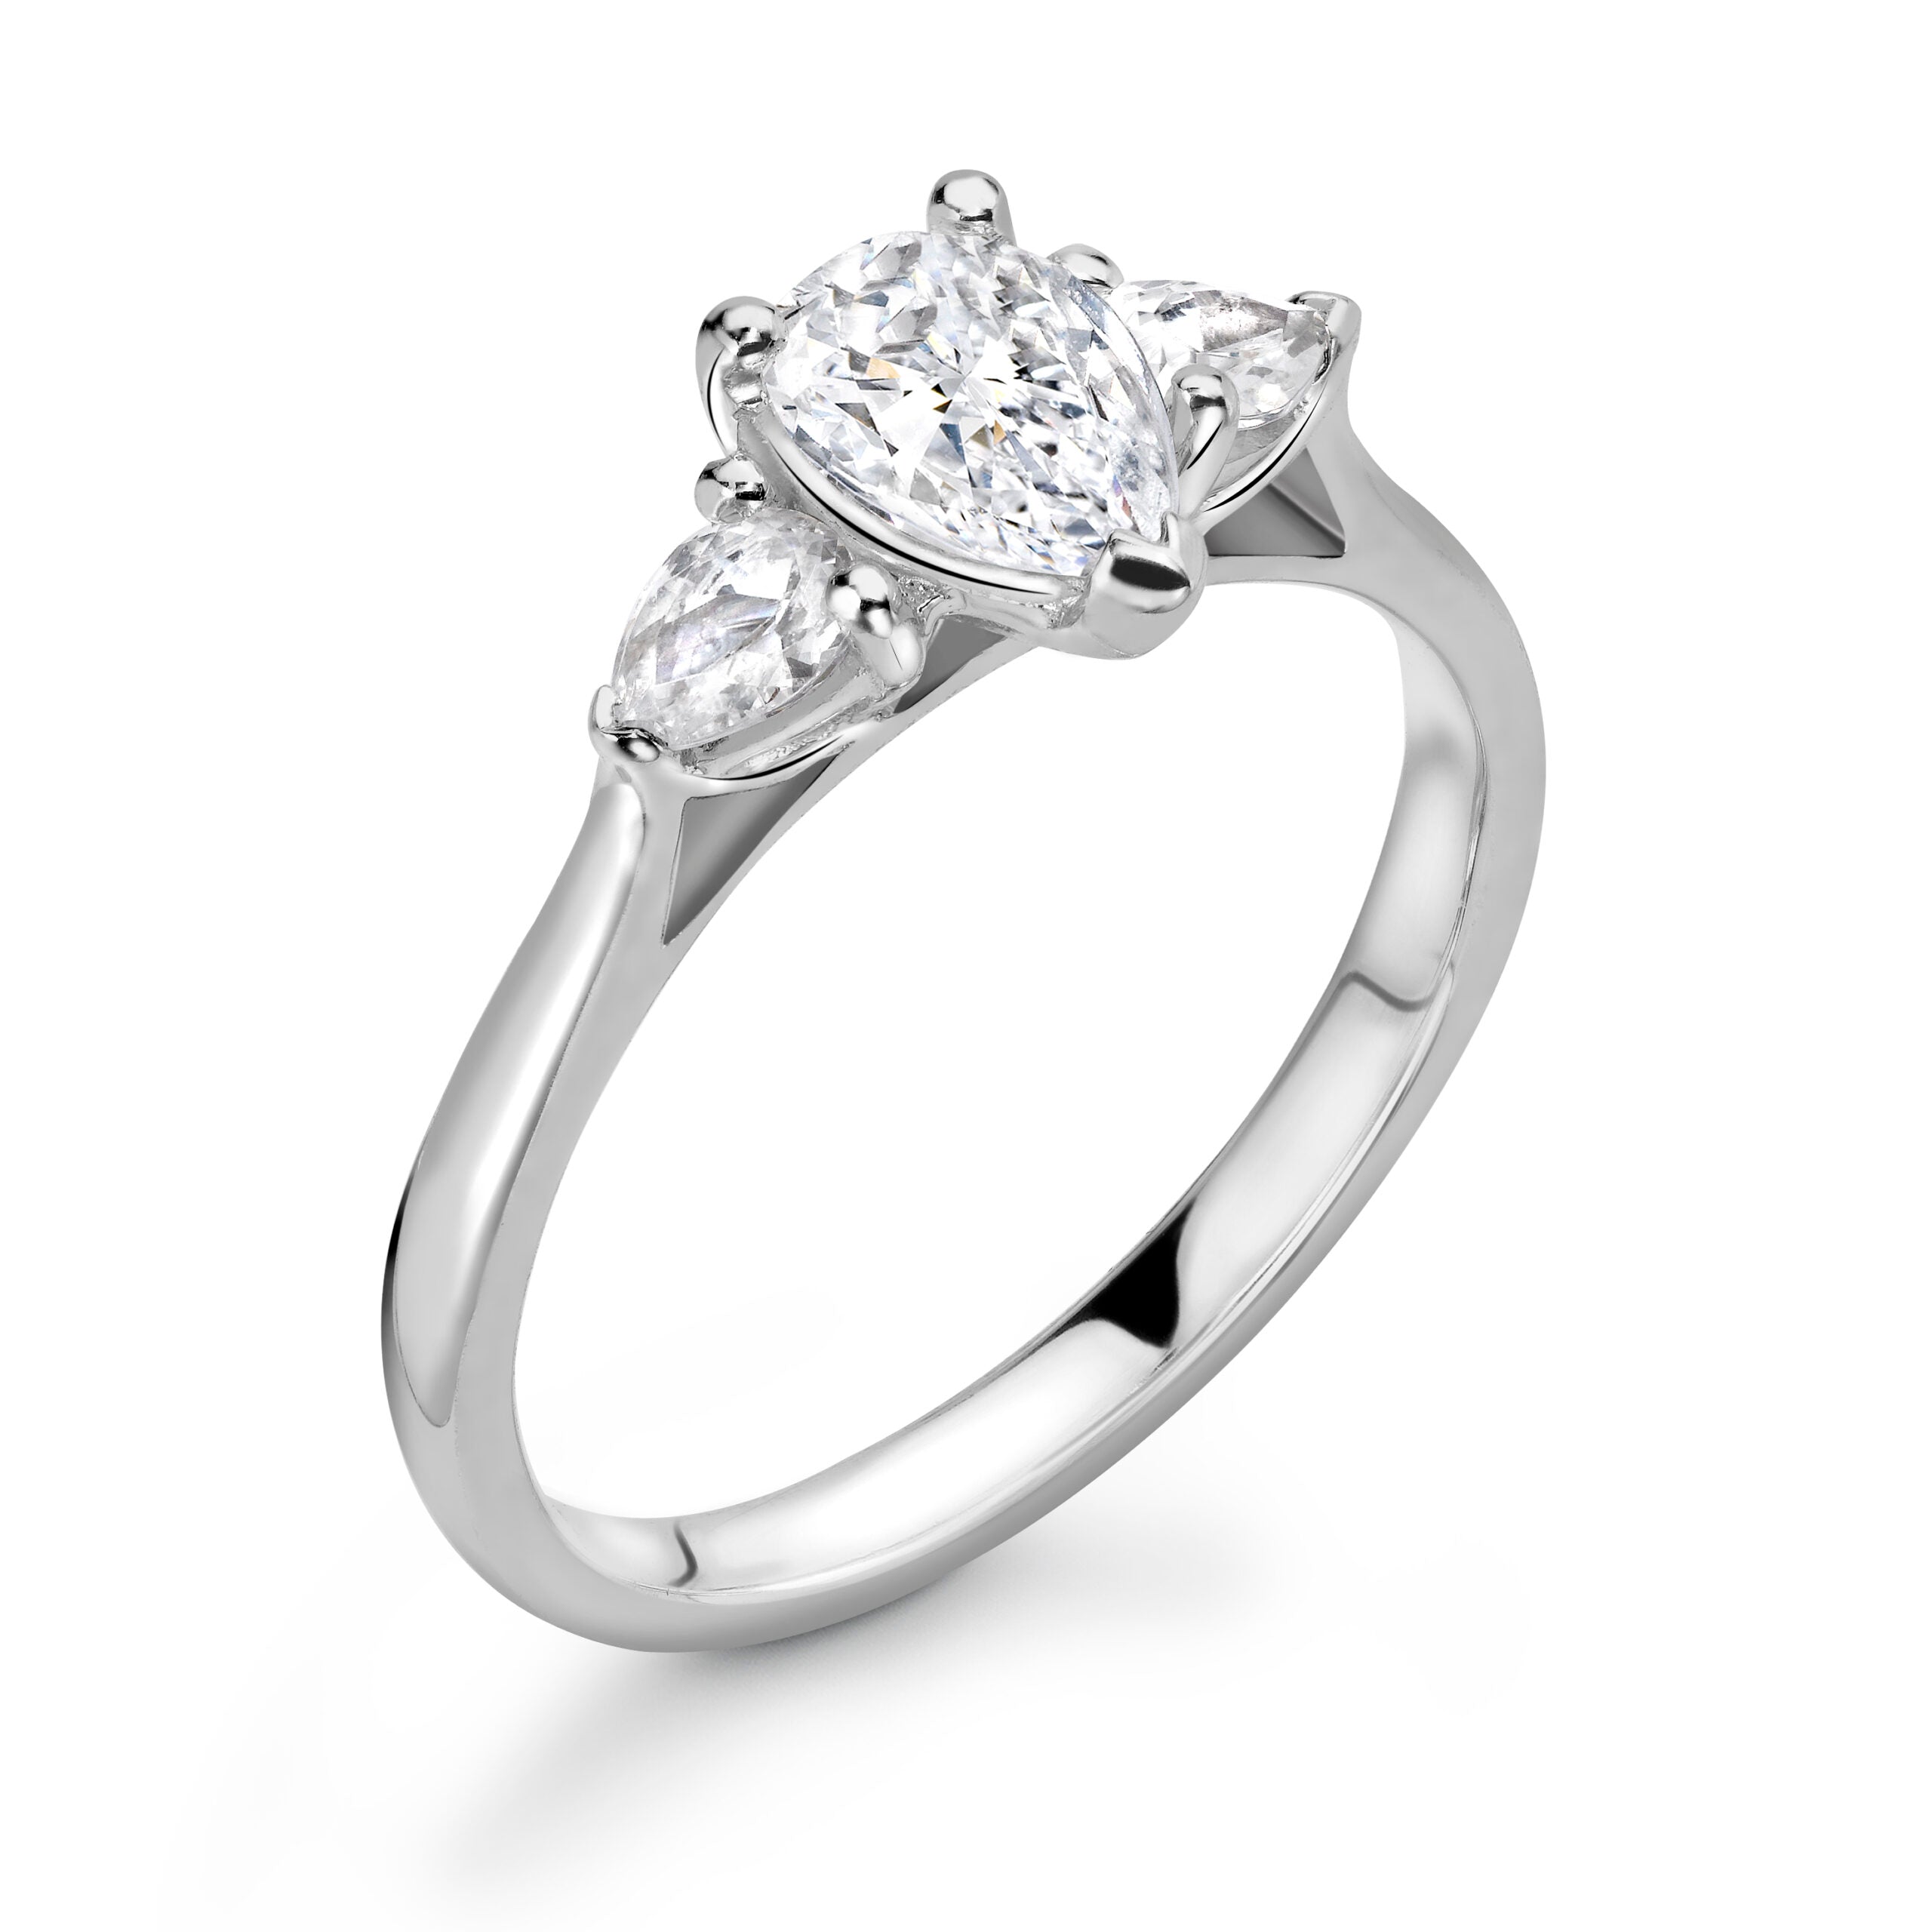 Pear Trilogy Diamond ring in White Gold